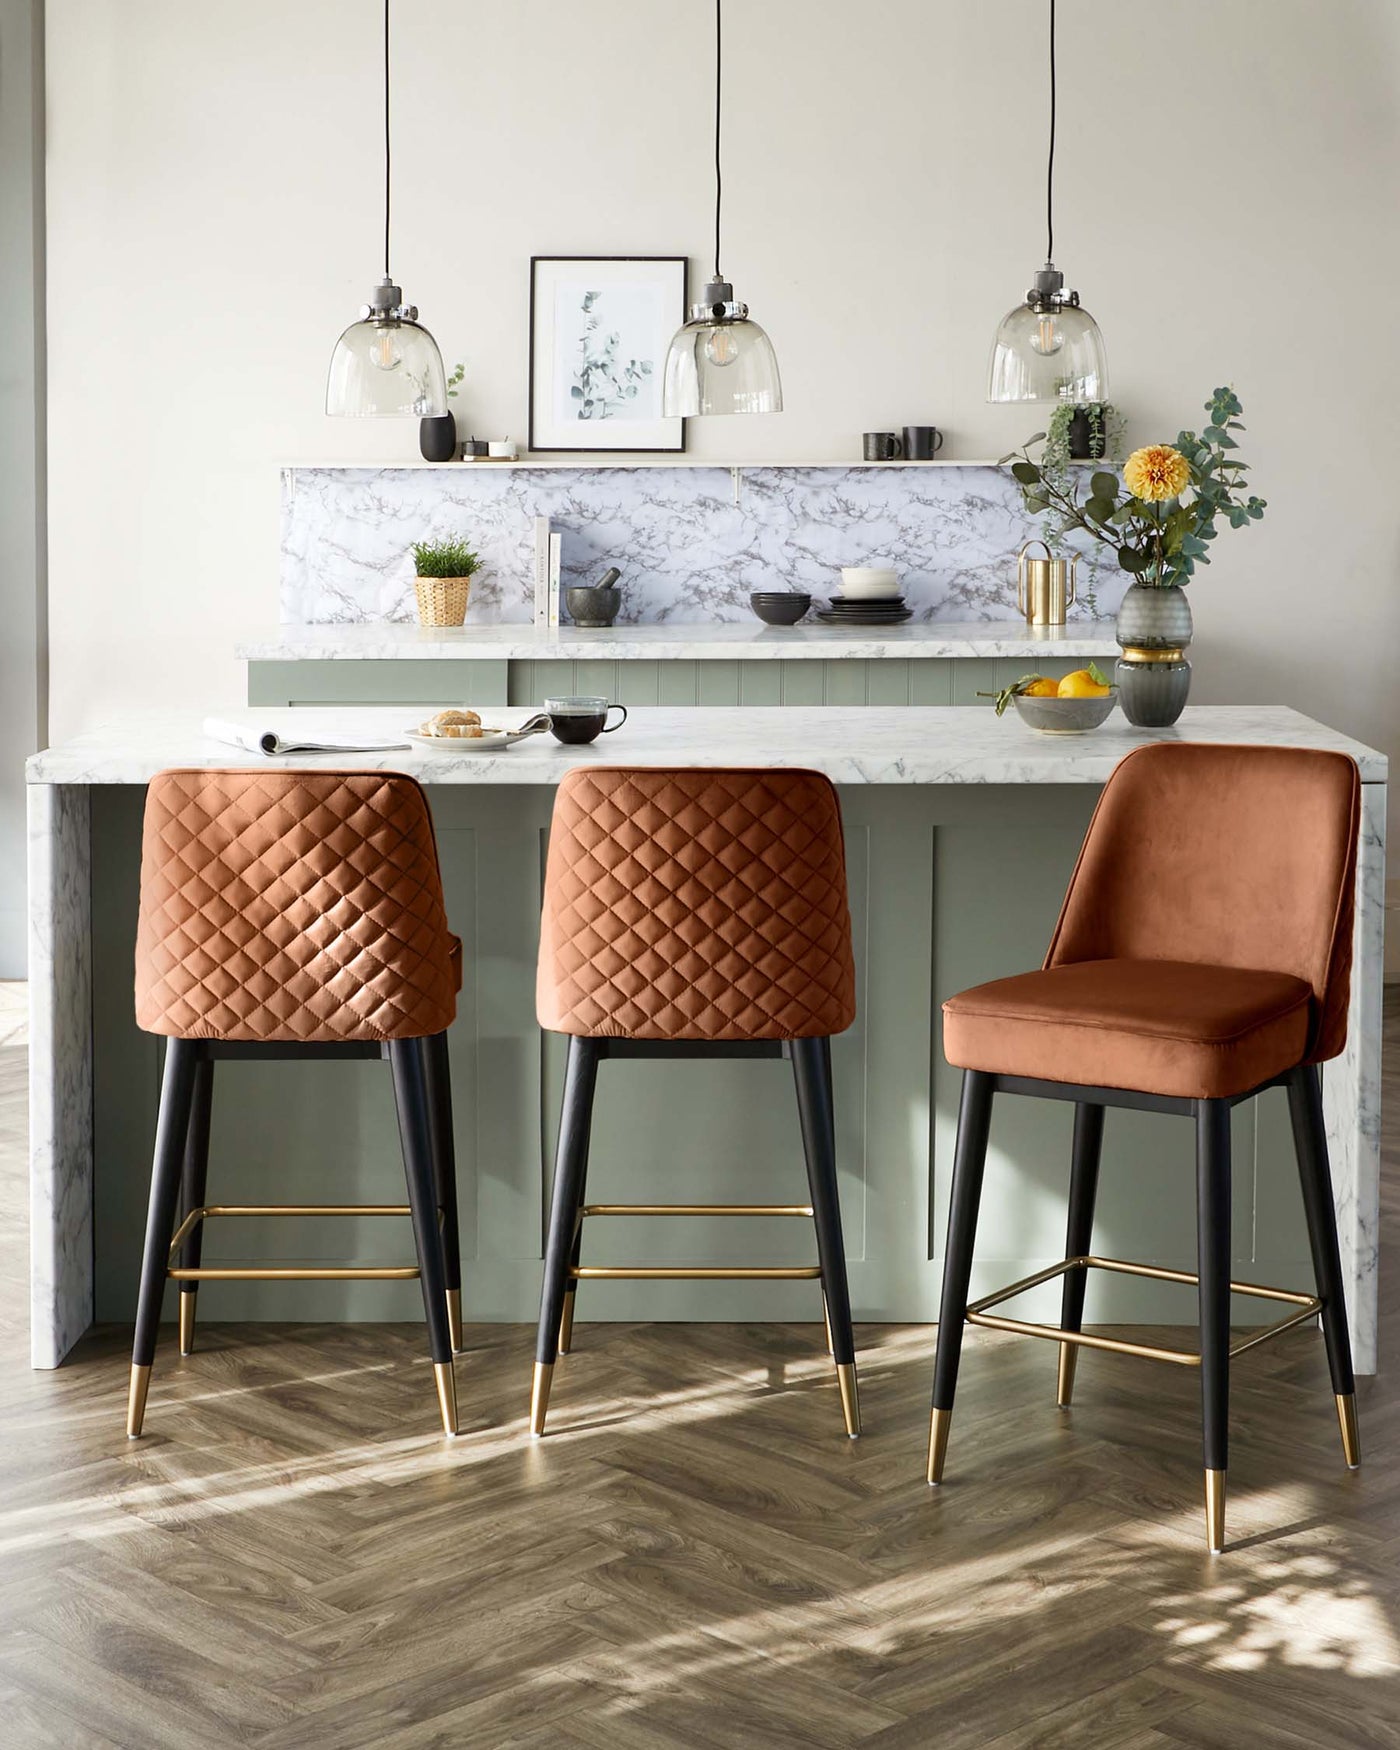 Modern kitchen bar setting featuring three stylish bar stools with quilted leather upholstery in shades of caramel and a single stool in burnt orange, all with slender black legs accented with gold tips. A marble-topped kitchen island with a pale green base serves as a breakfast bar, complemented by minimalist pendant lights overhead.